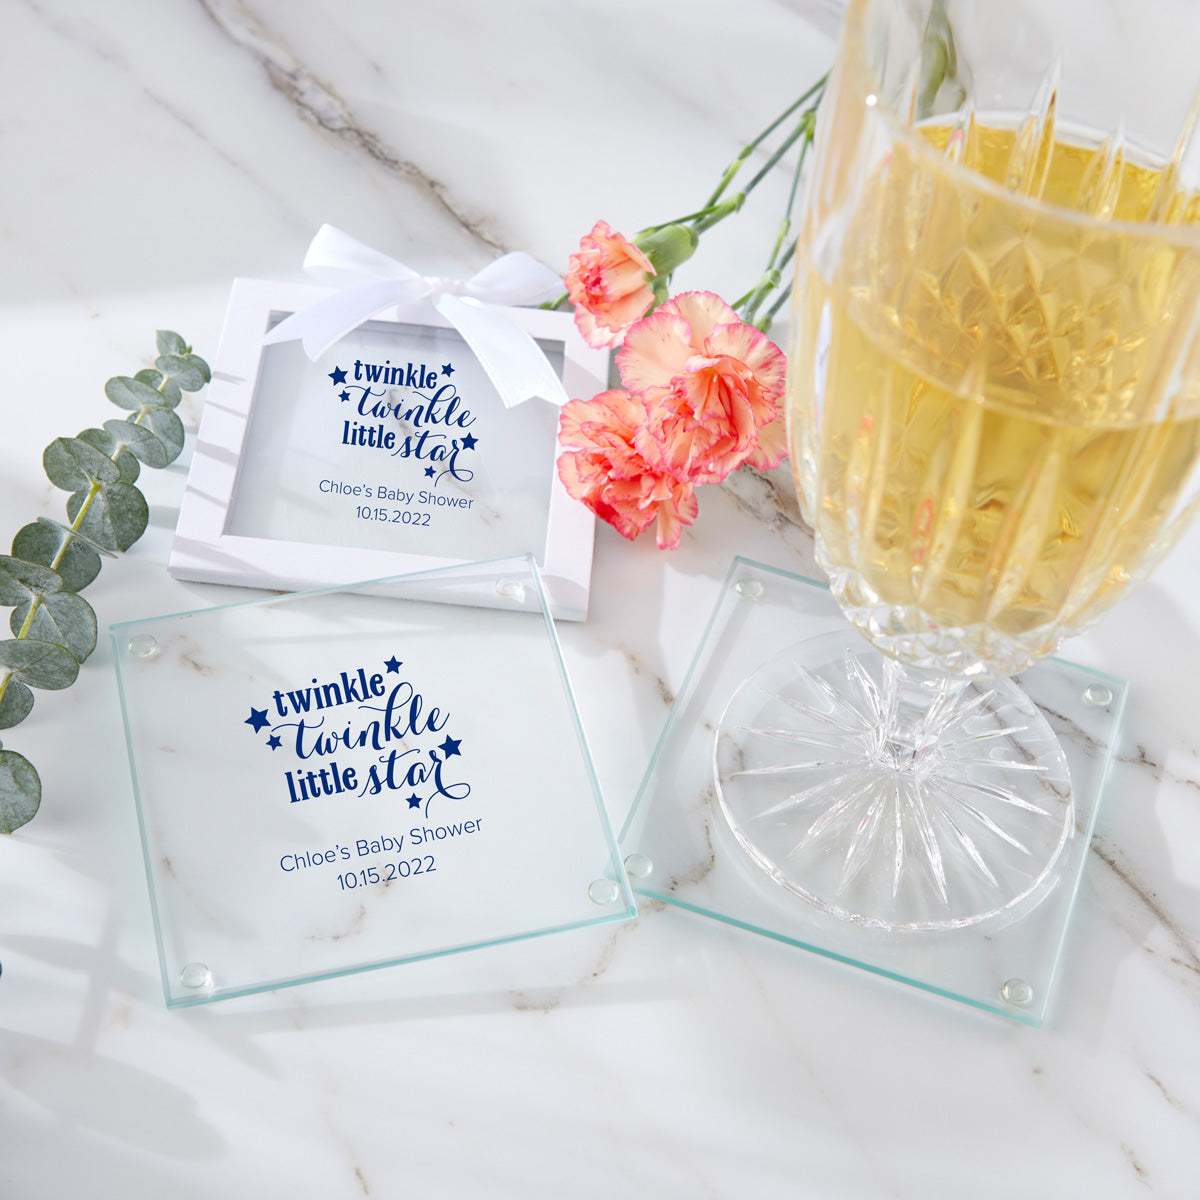 Personalized Glass Coaster (Set of 12) - Main Image9 | My Wedding Favors